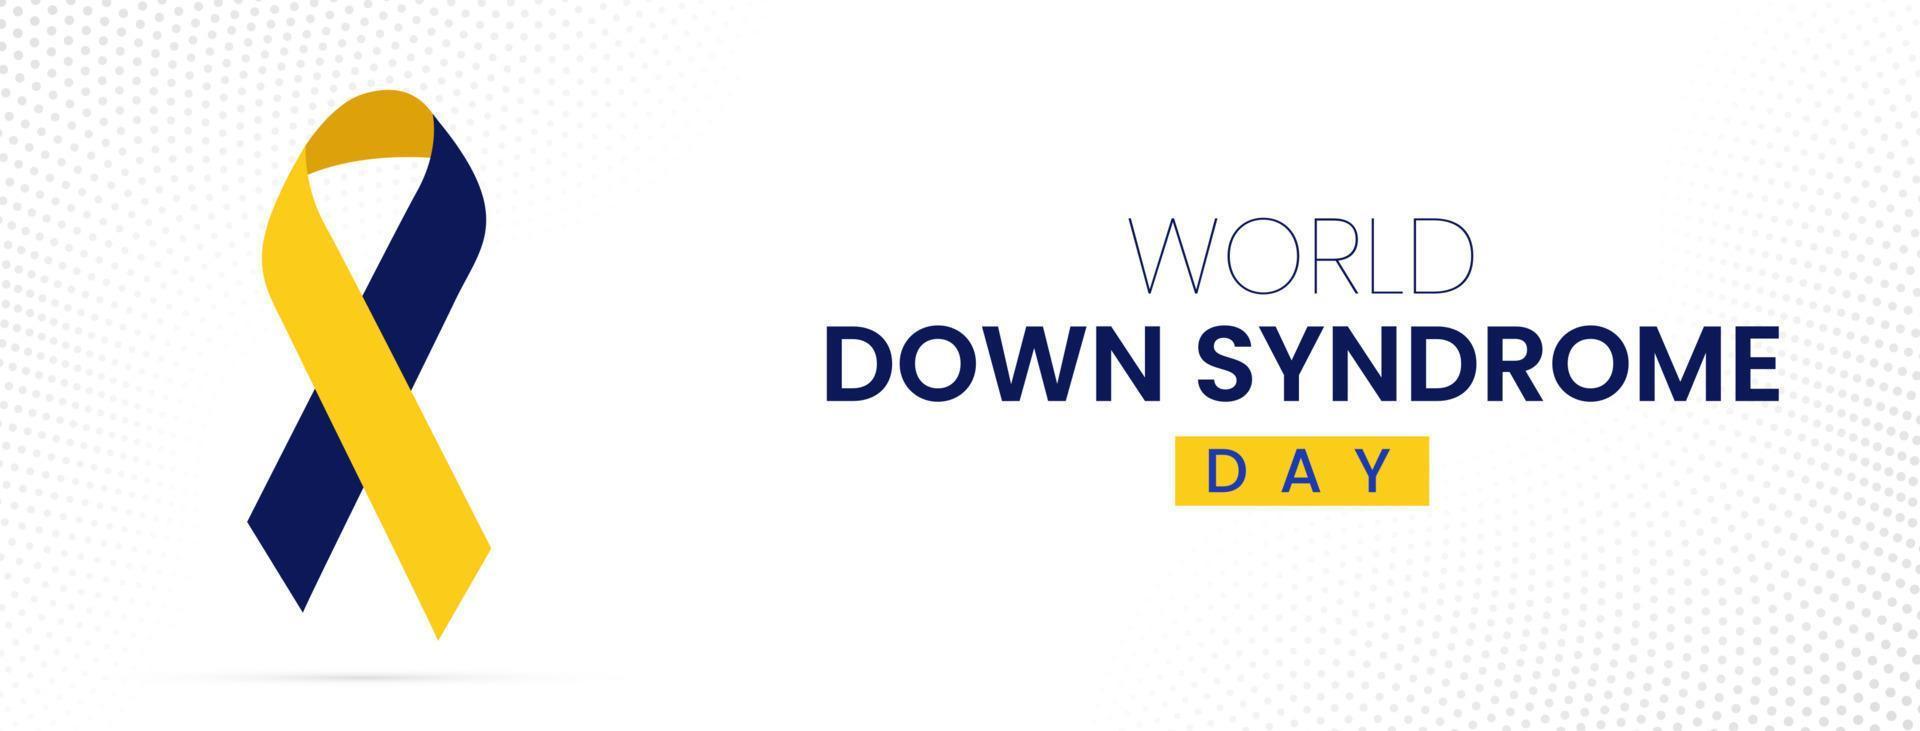 World Down Syndrome Day Social Media Post vector